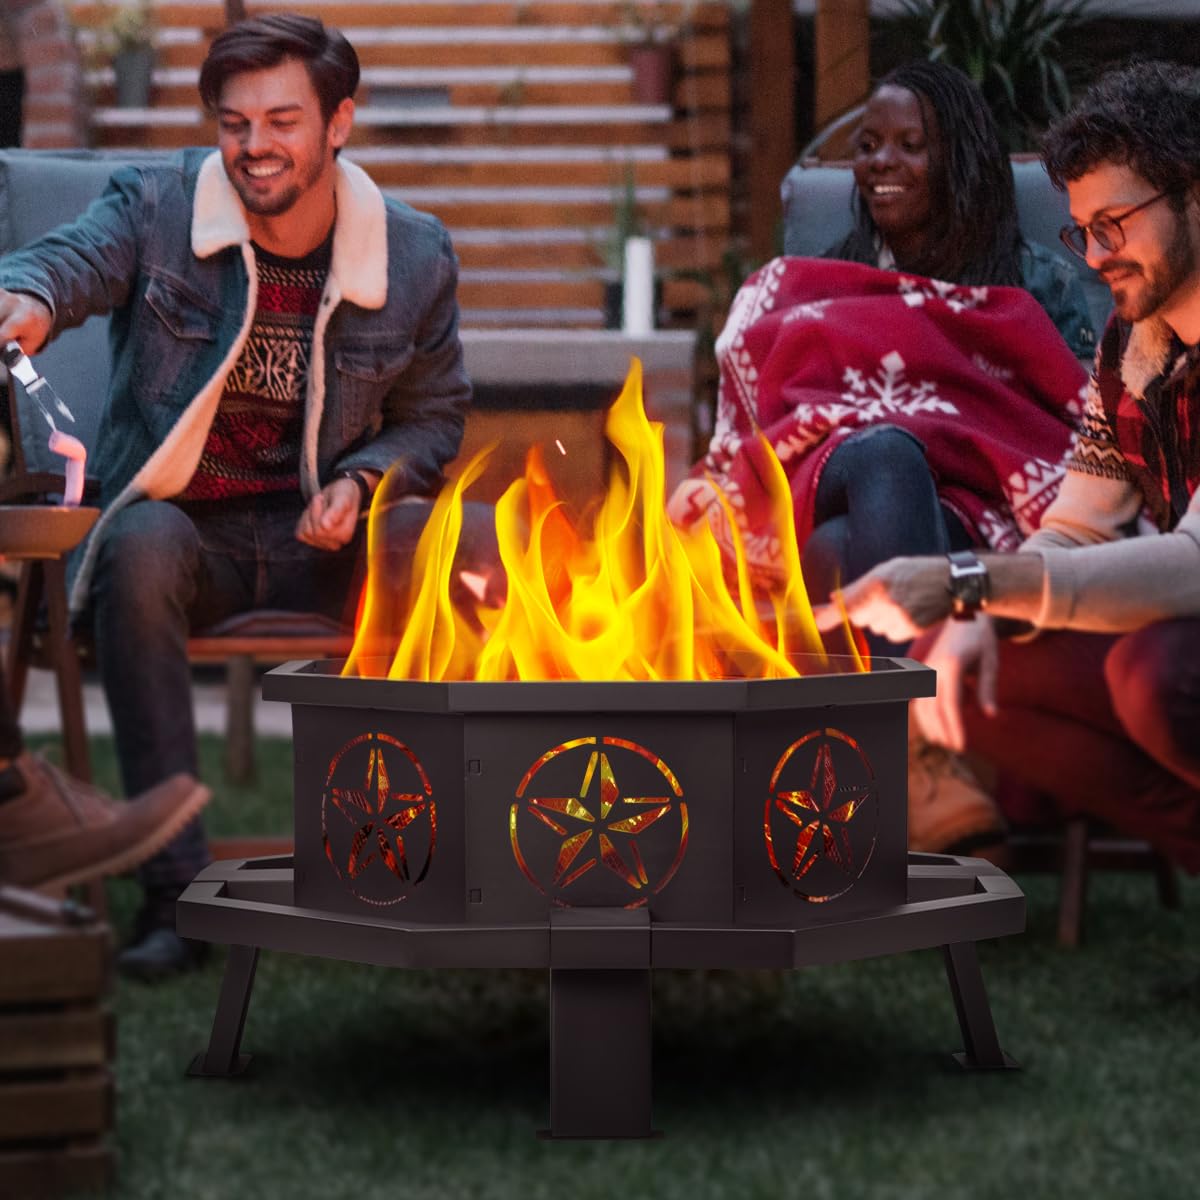 Verdeluxe 35 Inch Octagonal Fire Pit,Outdoor Fire Pit,Wood Burning Firepit,Bonfire Fire Pit,Firepits for Outside,Camping, Backyard, Patio,Bonfire